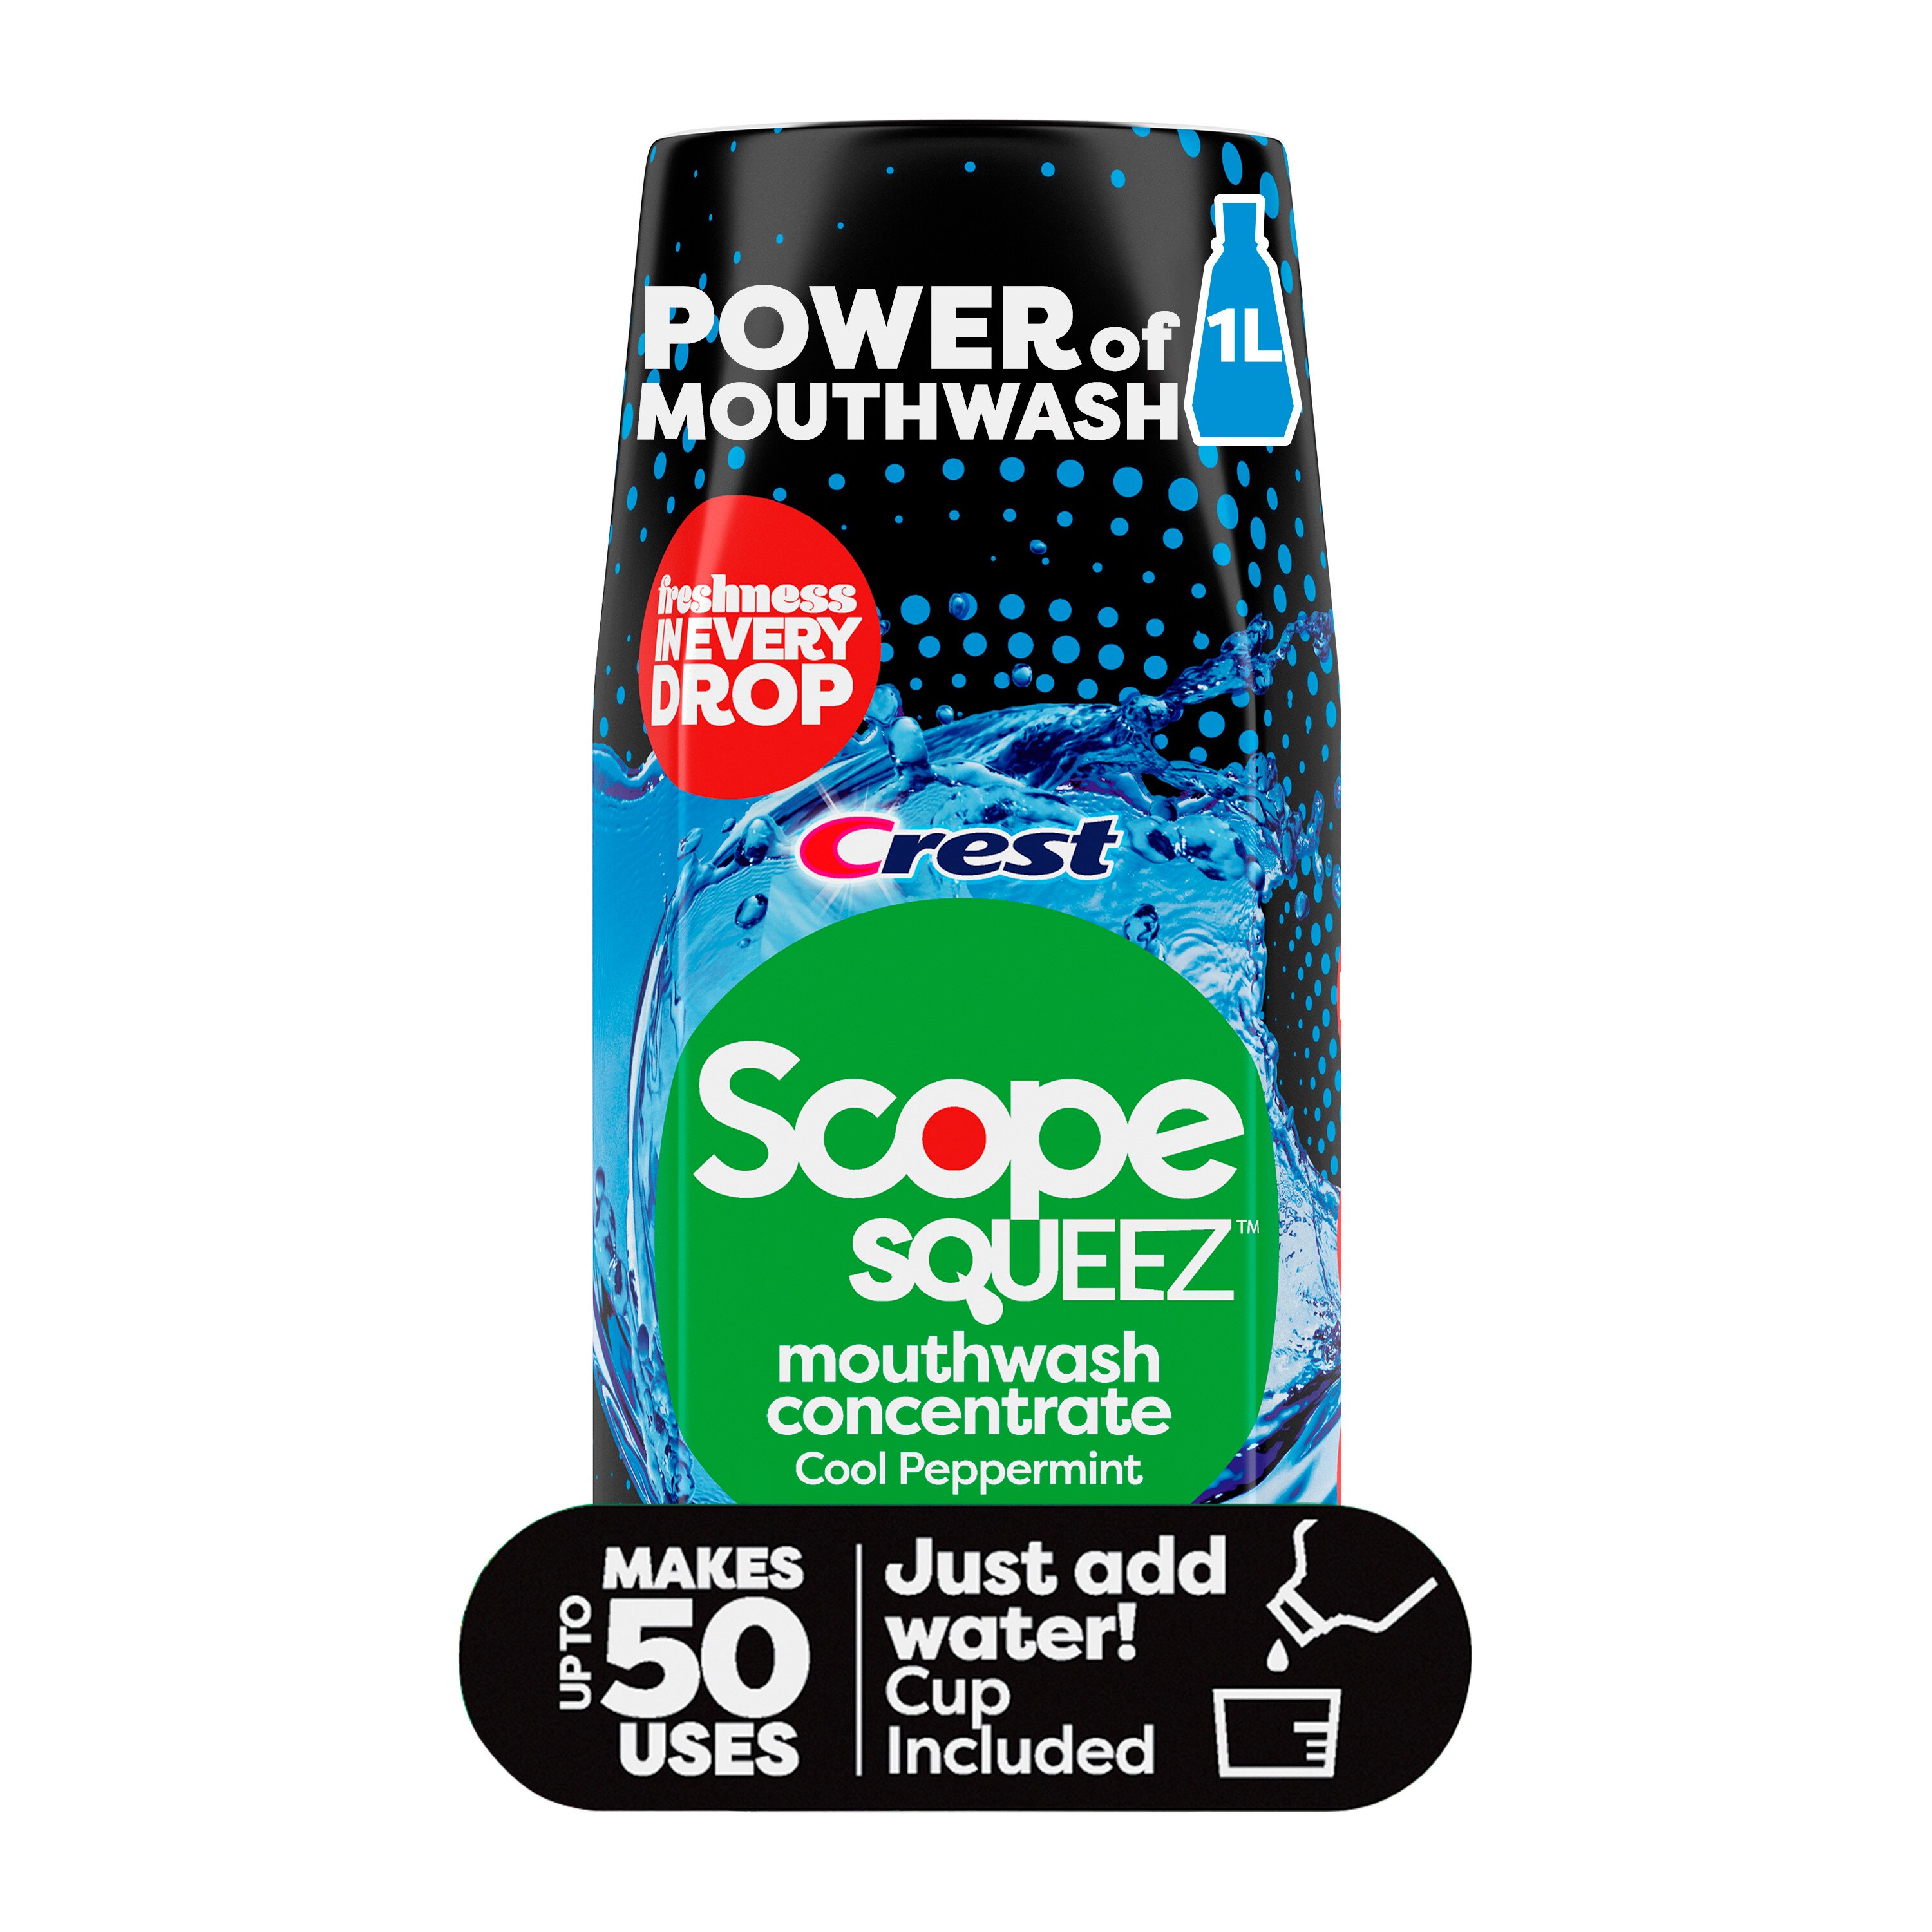 Scope Squeez Mouthwash Concentrate, 50 Ml Makes Up To 50 Uses, Cool Peppermint - 1.69 Oz , CVS